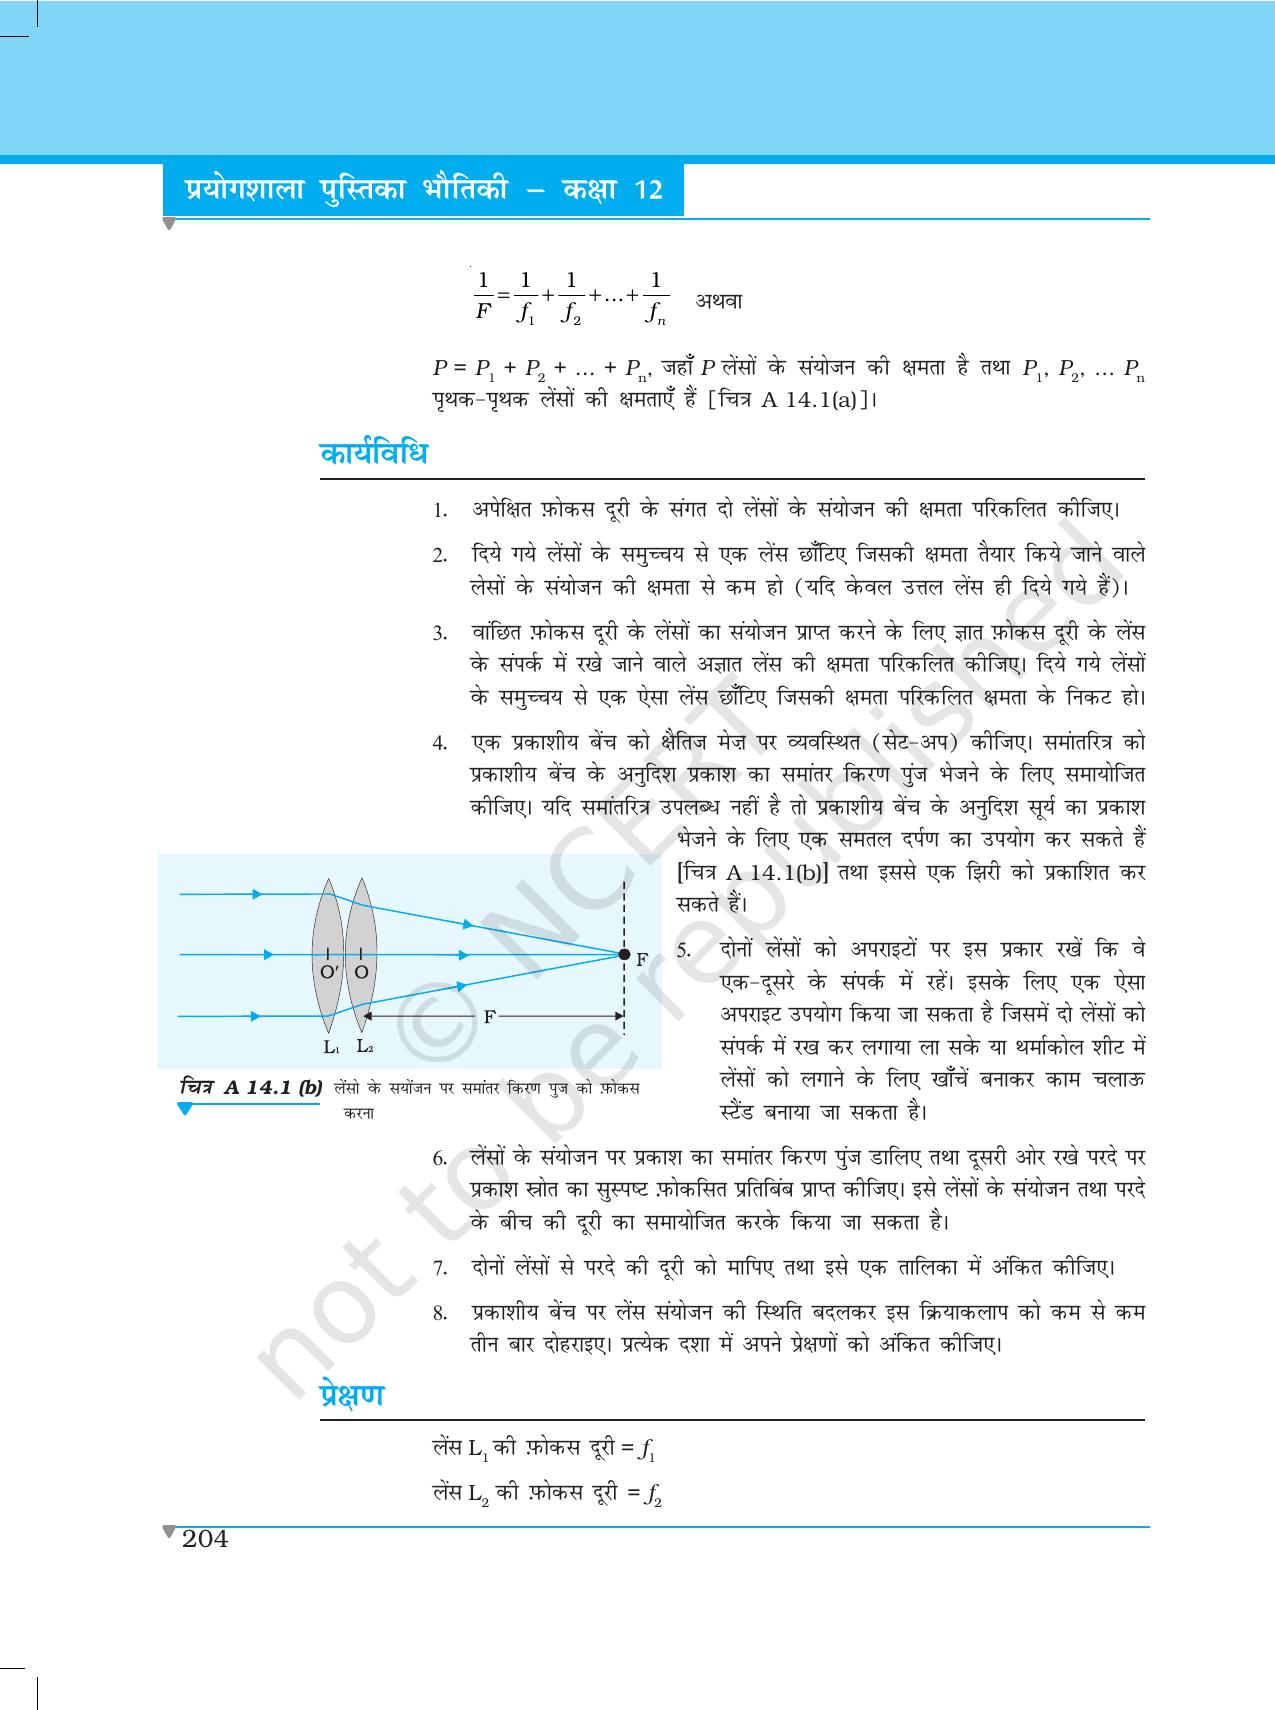 NCERT Laboratory Manuals for Class XII भौतिकी - क्रियाकलाप (12 - 14) - Page 15